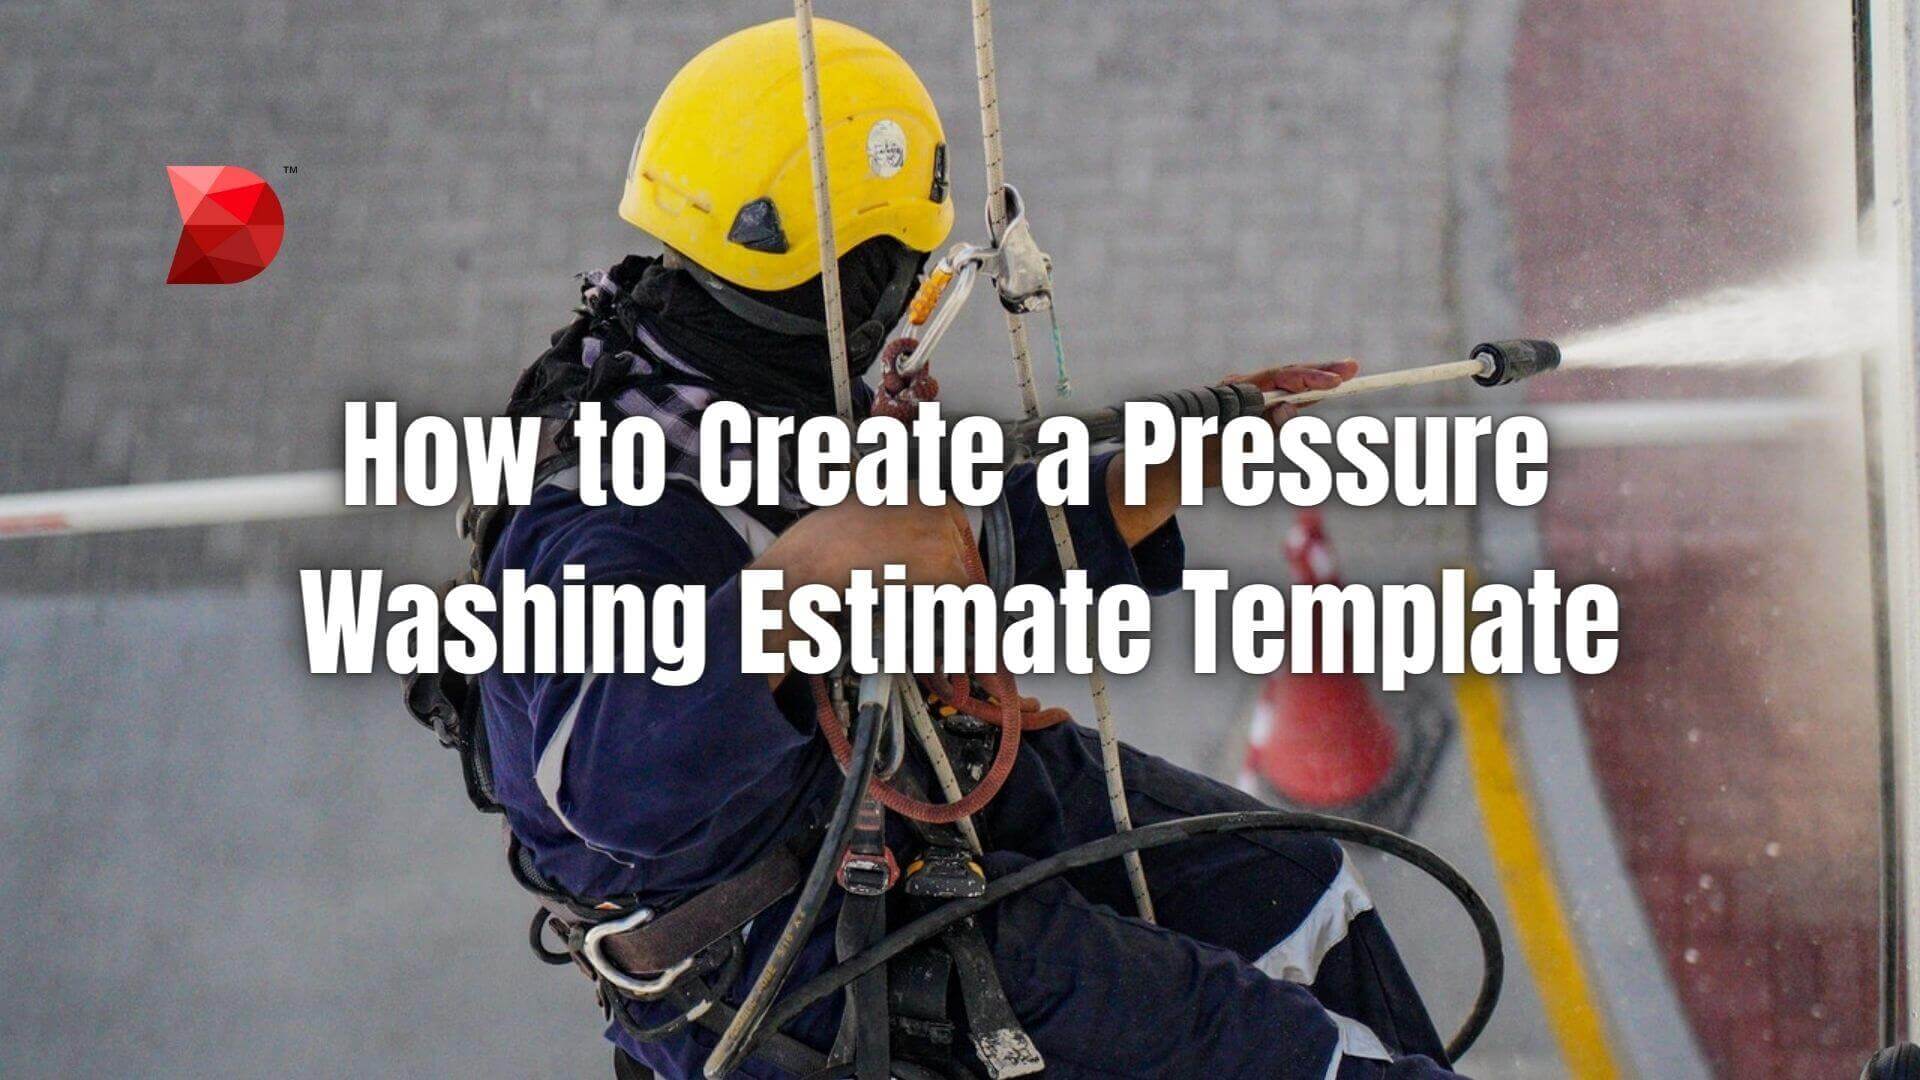 How to Create a Pressure Washing Estimate Template